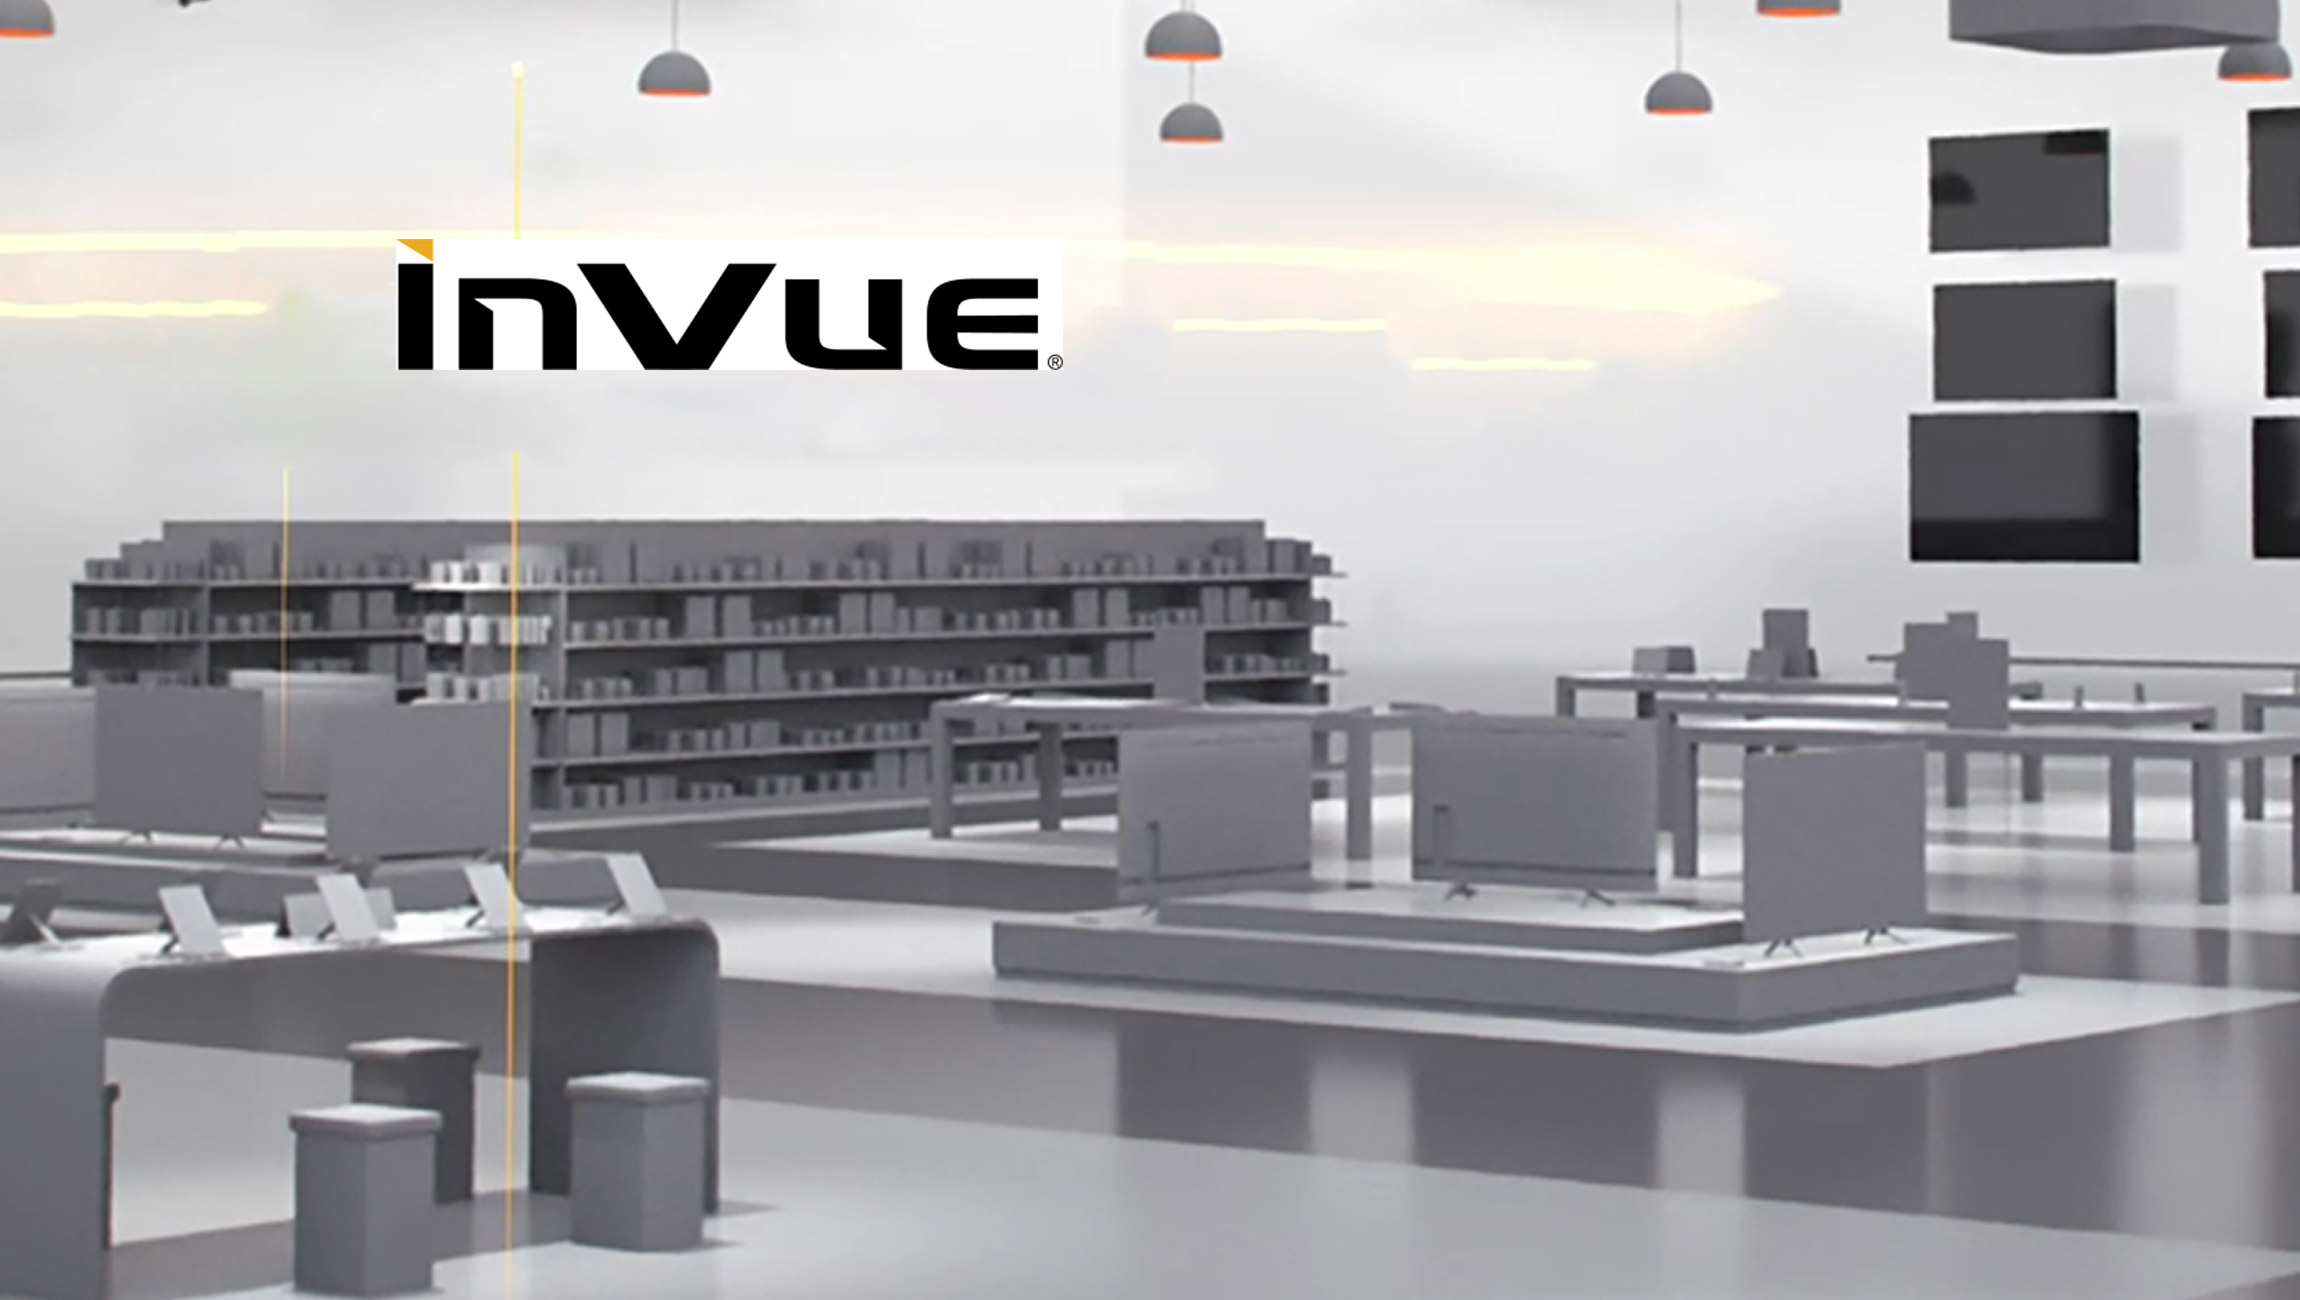 InVue Expands to Create a Connected System for In-Store Retail Operations